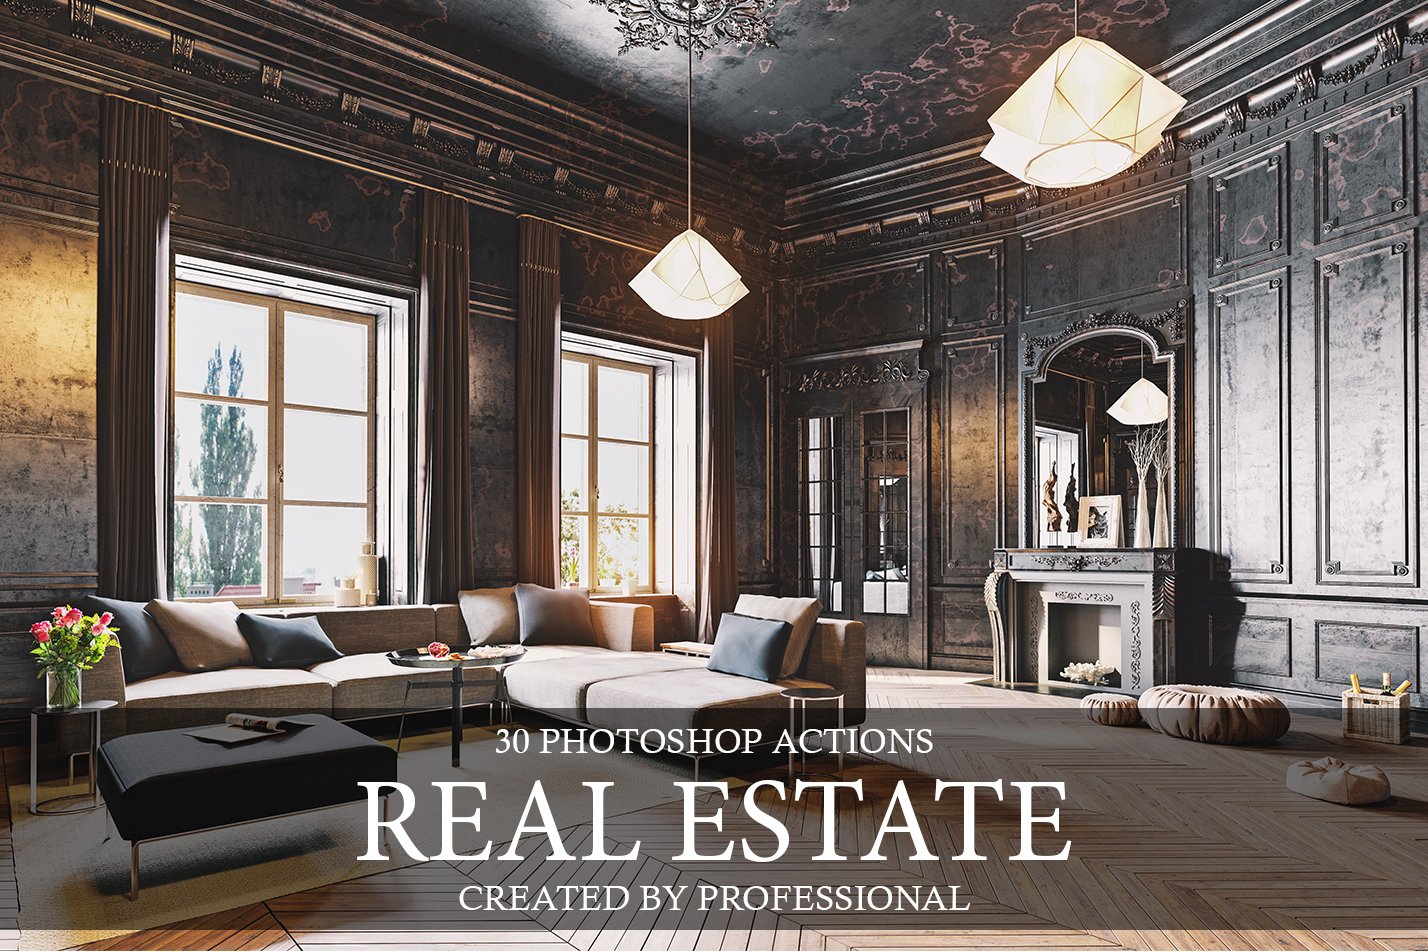 Real Estate Photoshop Actionscover image.